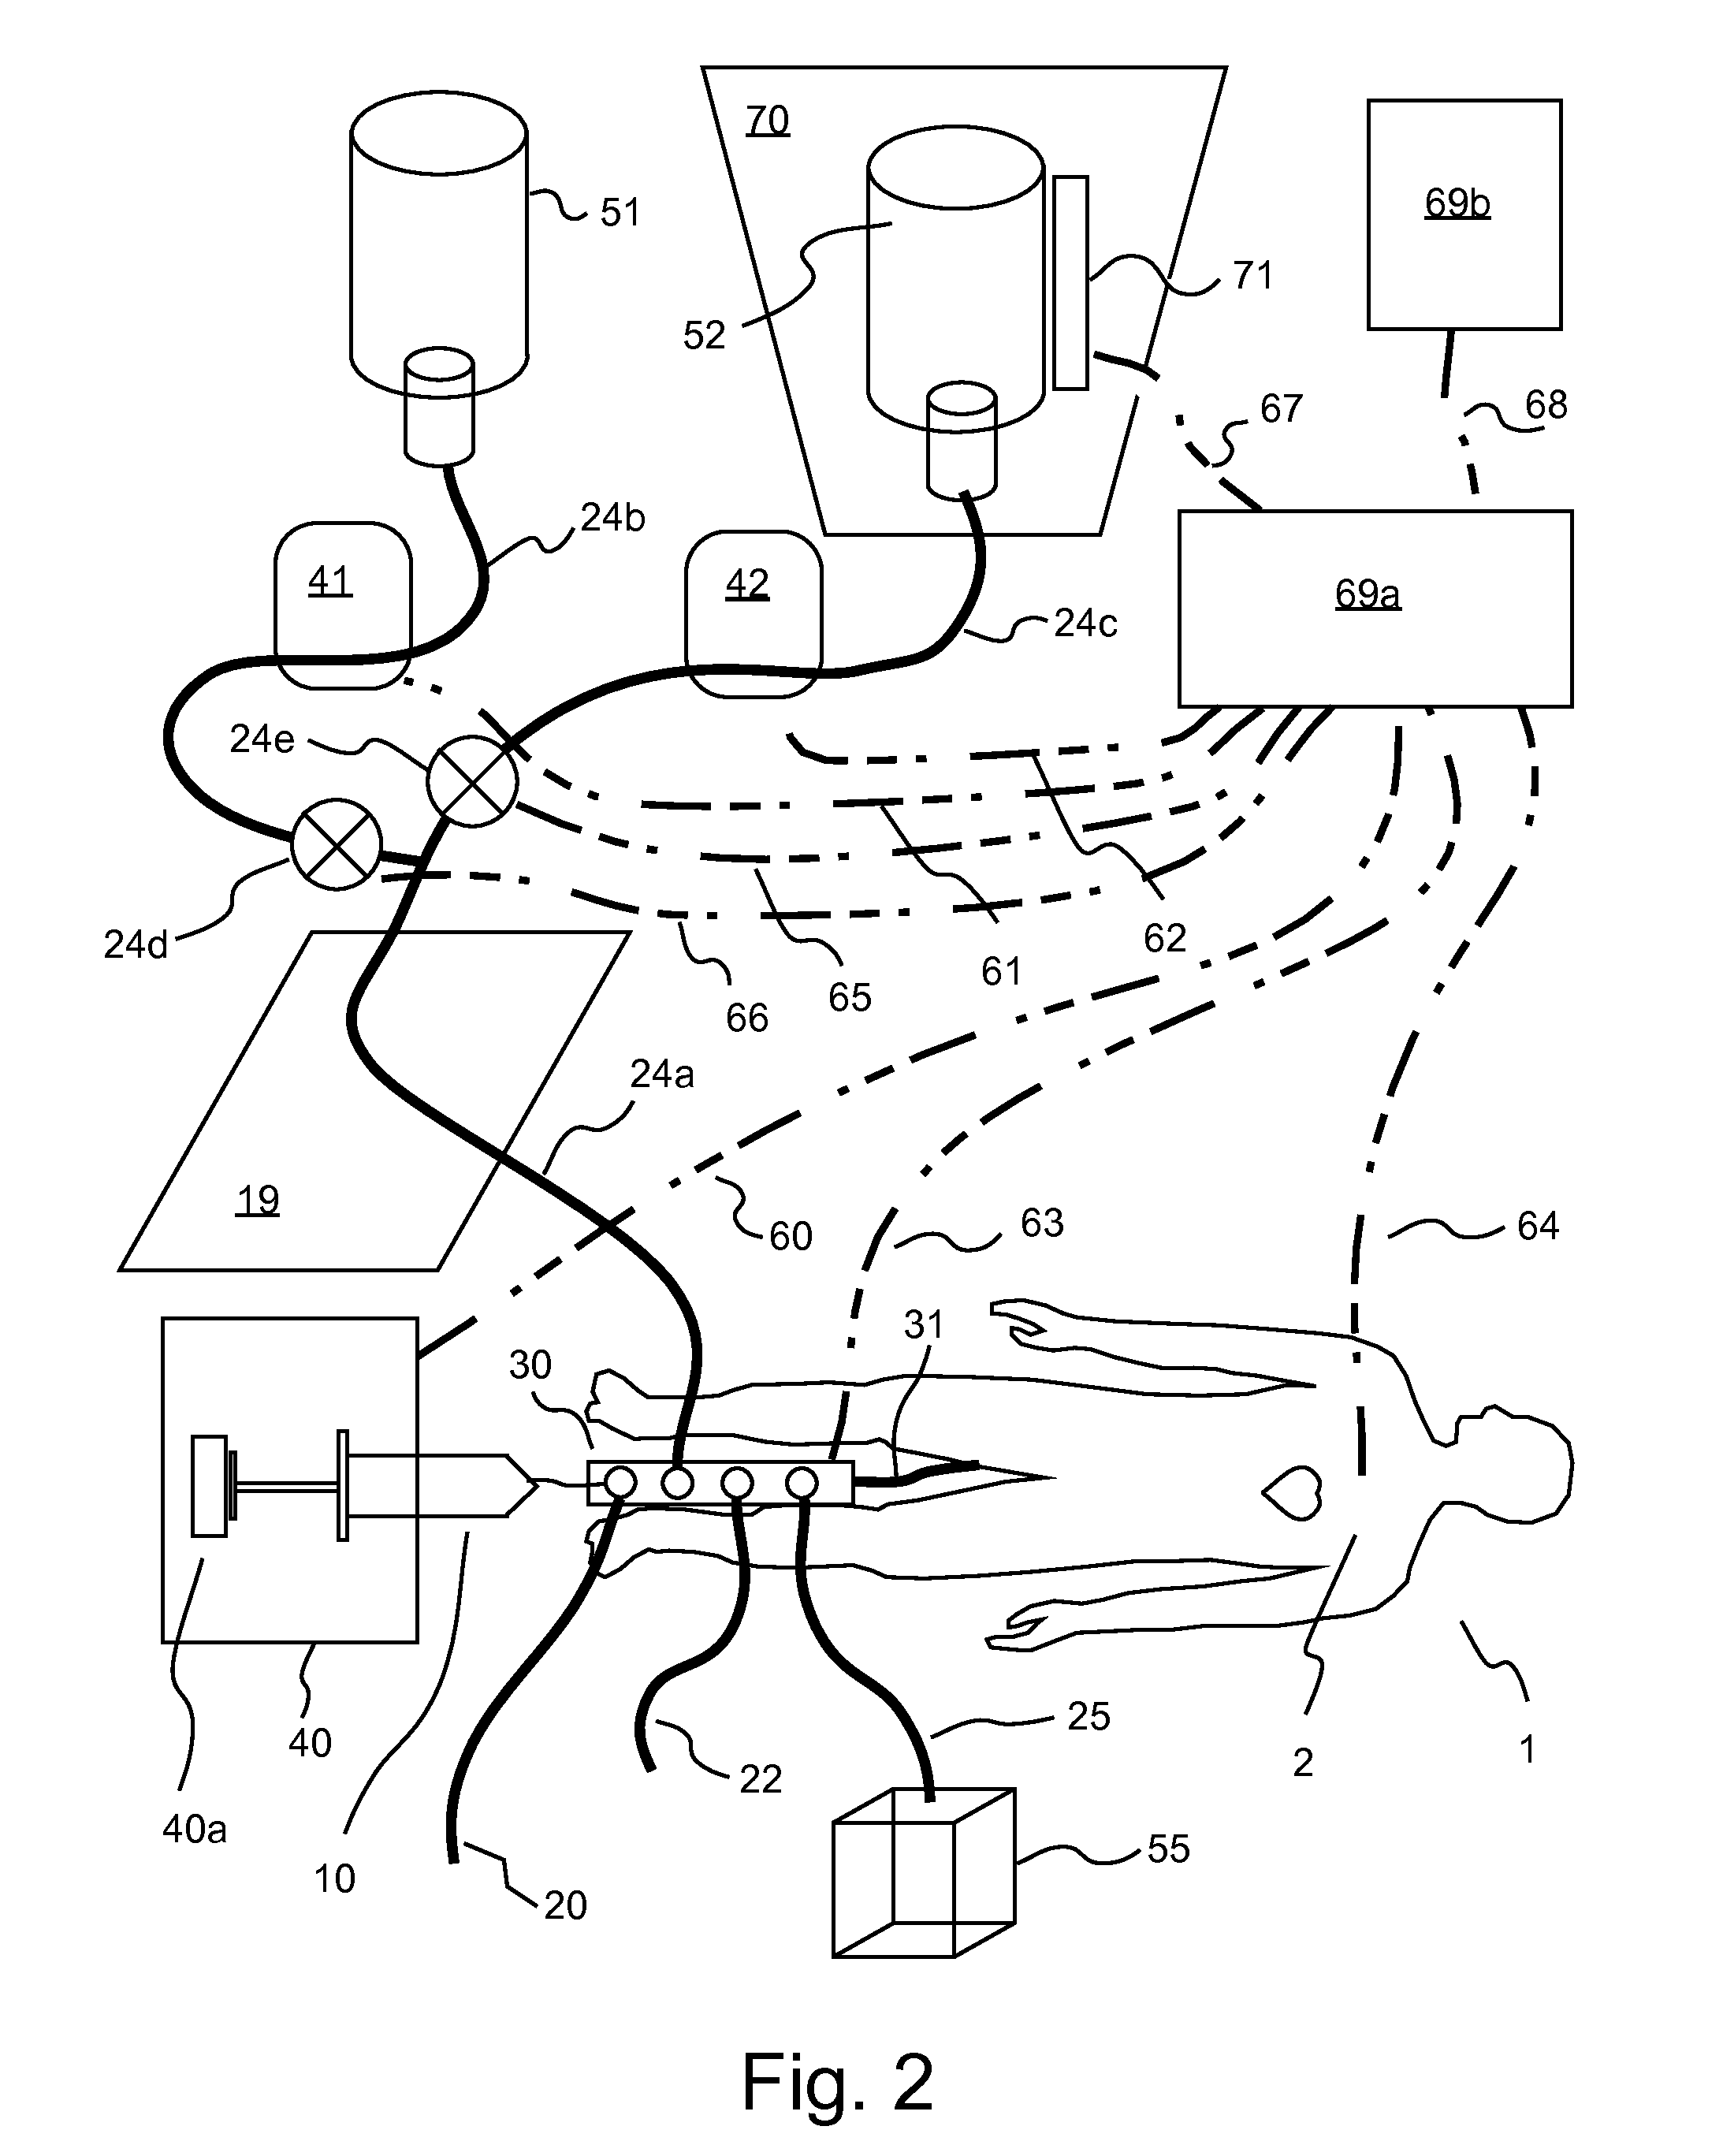 Fluid delivery systems, devices and methods for delivery of hazardous fluids